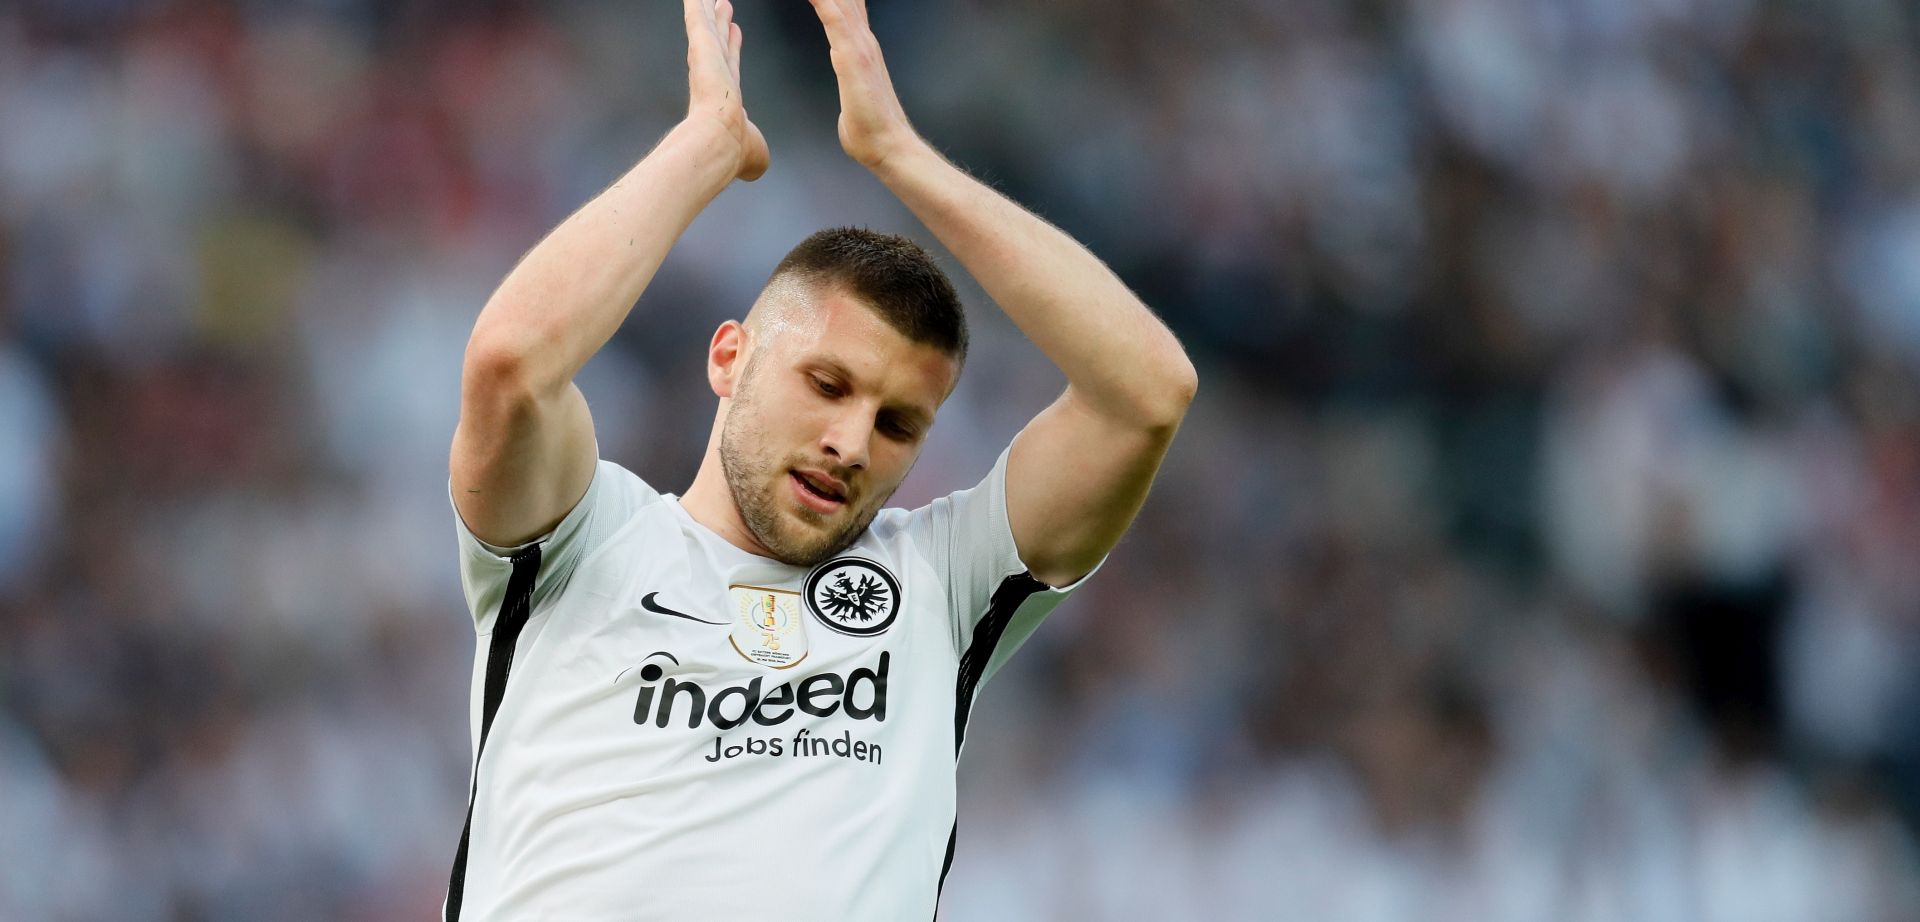 epa06750775 Frankfurt's Ante Rebic reacts during the German DFB Cup final soccer match between FC Bayern Munich and Eintracht Frankfurt at the Olympic Stadium in Berlin, Germany, 19 May 2018. (ATTENTION: The DFB prohibits the utilisation and publication of sequential pictures on the internet and other online media during the match (including half-time). ATTENTION: BLOCKING PERIOD! The DFB permits the further utilisation and publication of the pictures for mobile services (especially MMS) and for DVB-H and DMB only after the end of the match.)  EPA/RONALD WITTEK